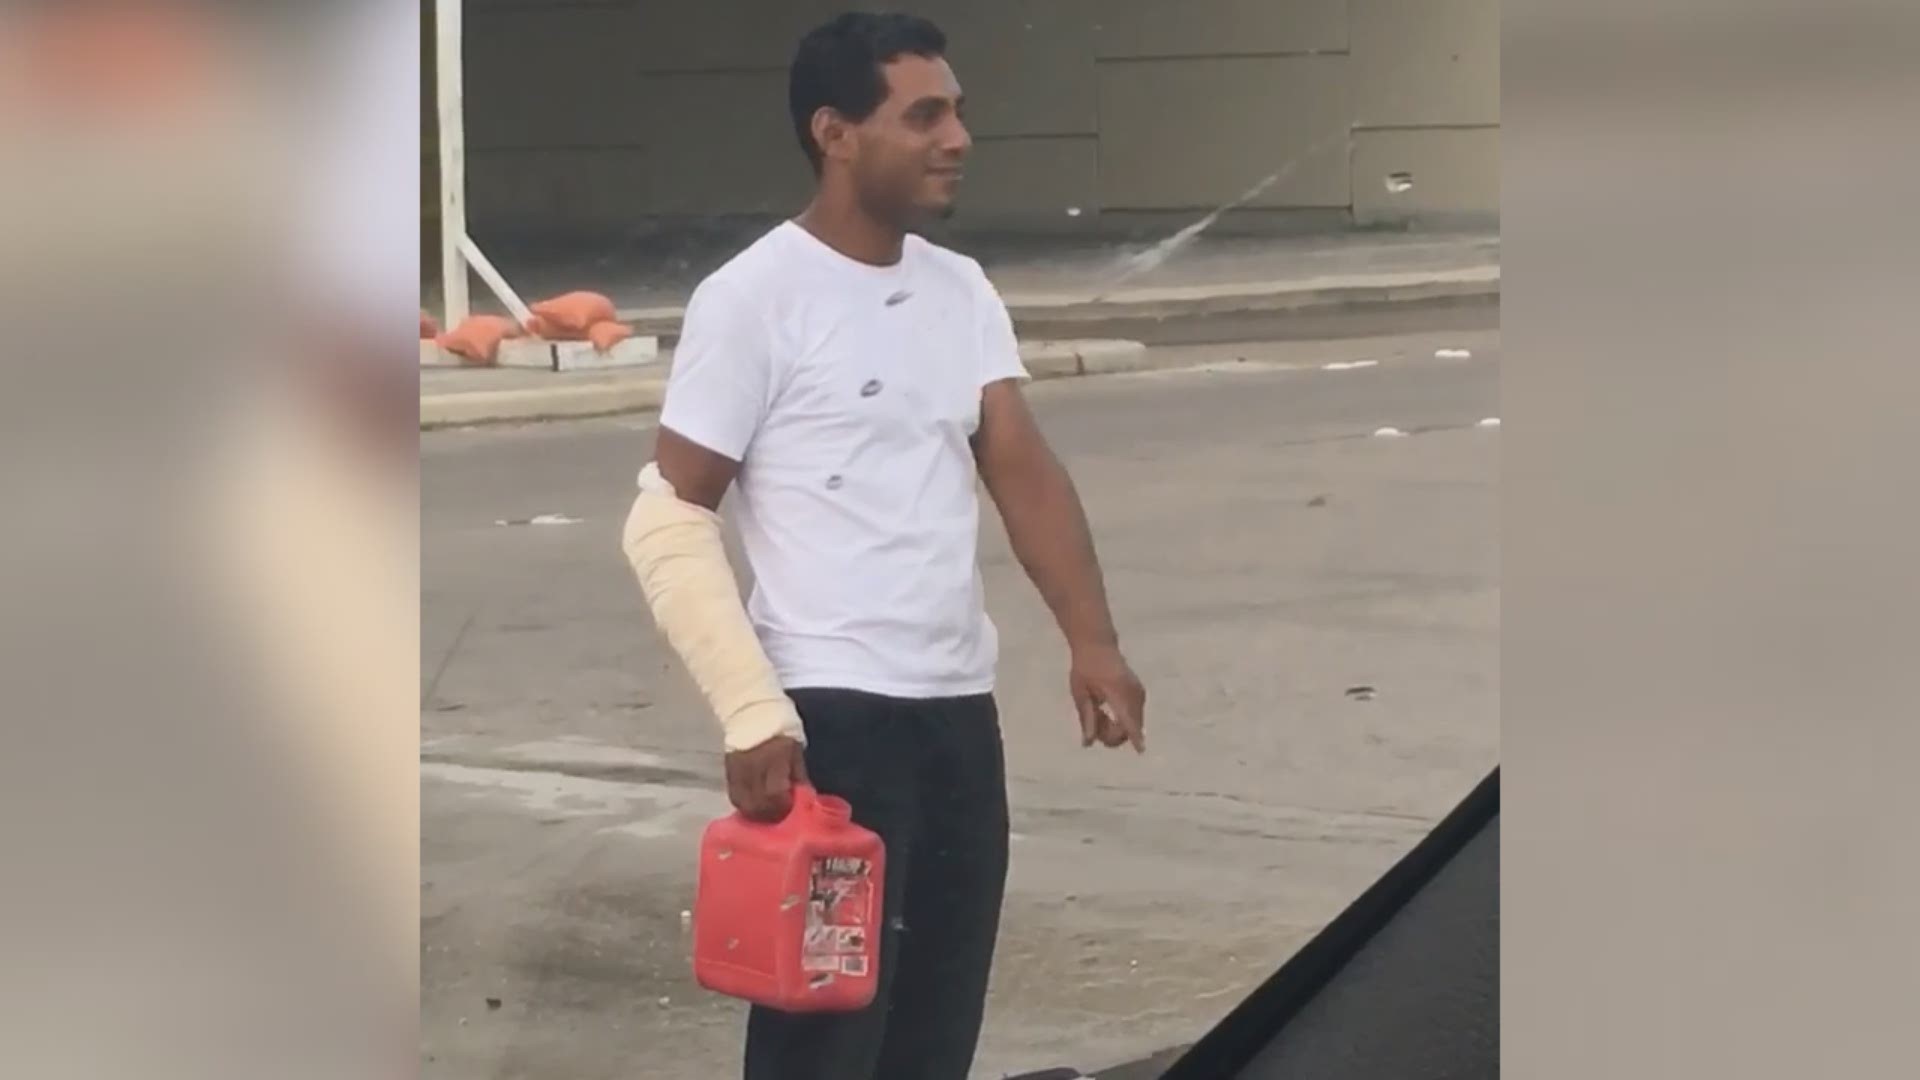 Luz Garcia is known as the Gas Can Man throughout the Clear Lake, Webster and League City area for has panhandling ploy of acting like a driver who's run out of gas. But drivers say Garcia takes it to the extreme and harrasses people for money. (Videos: R